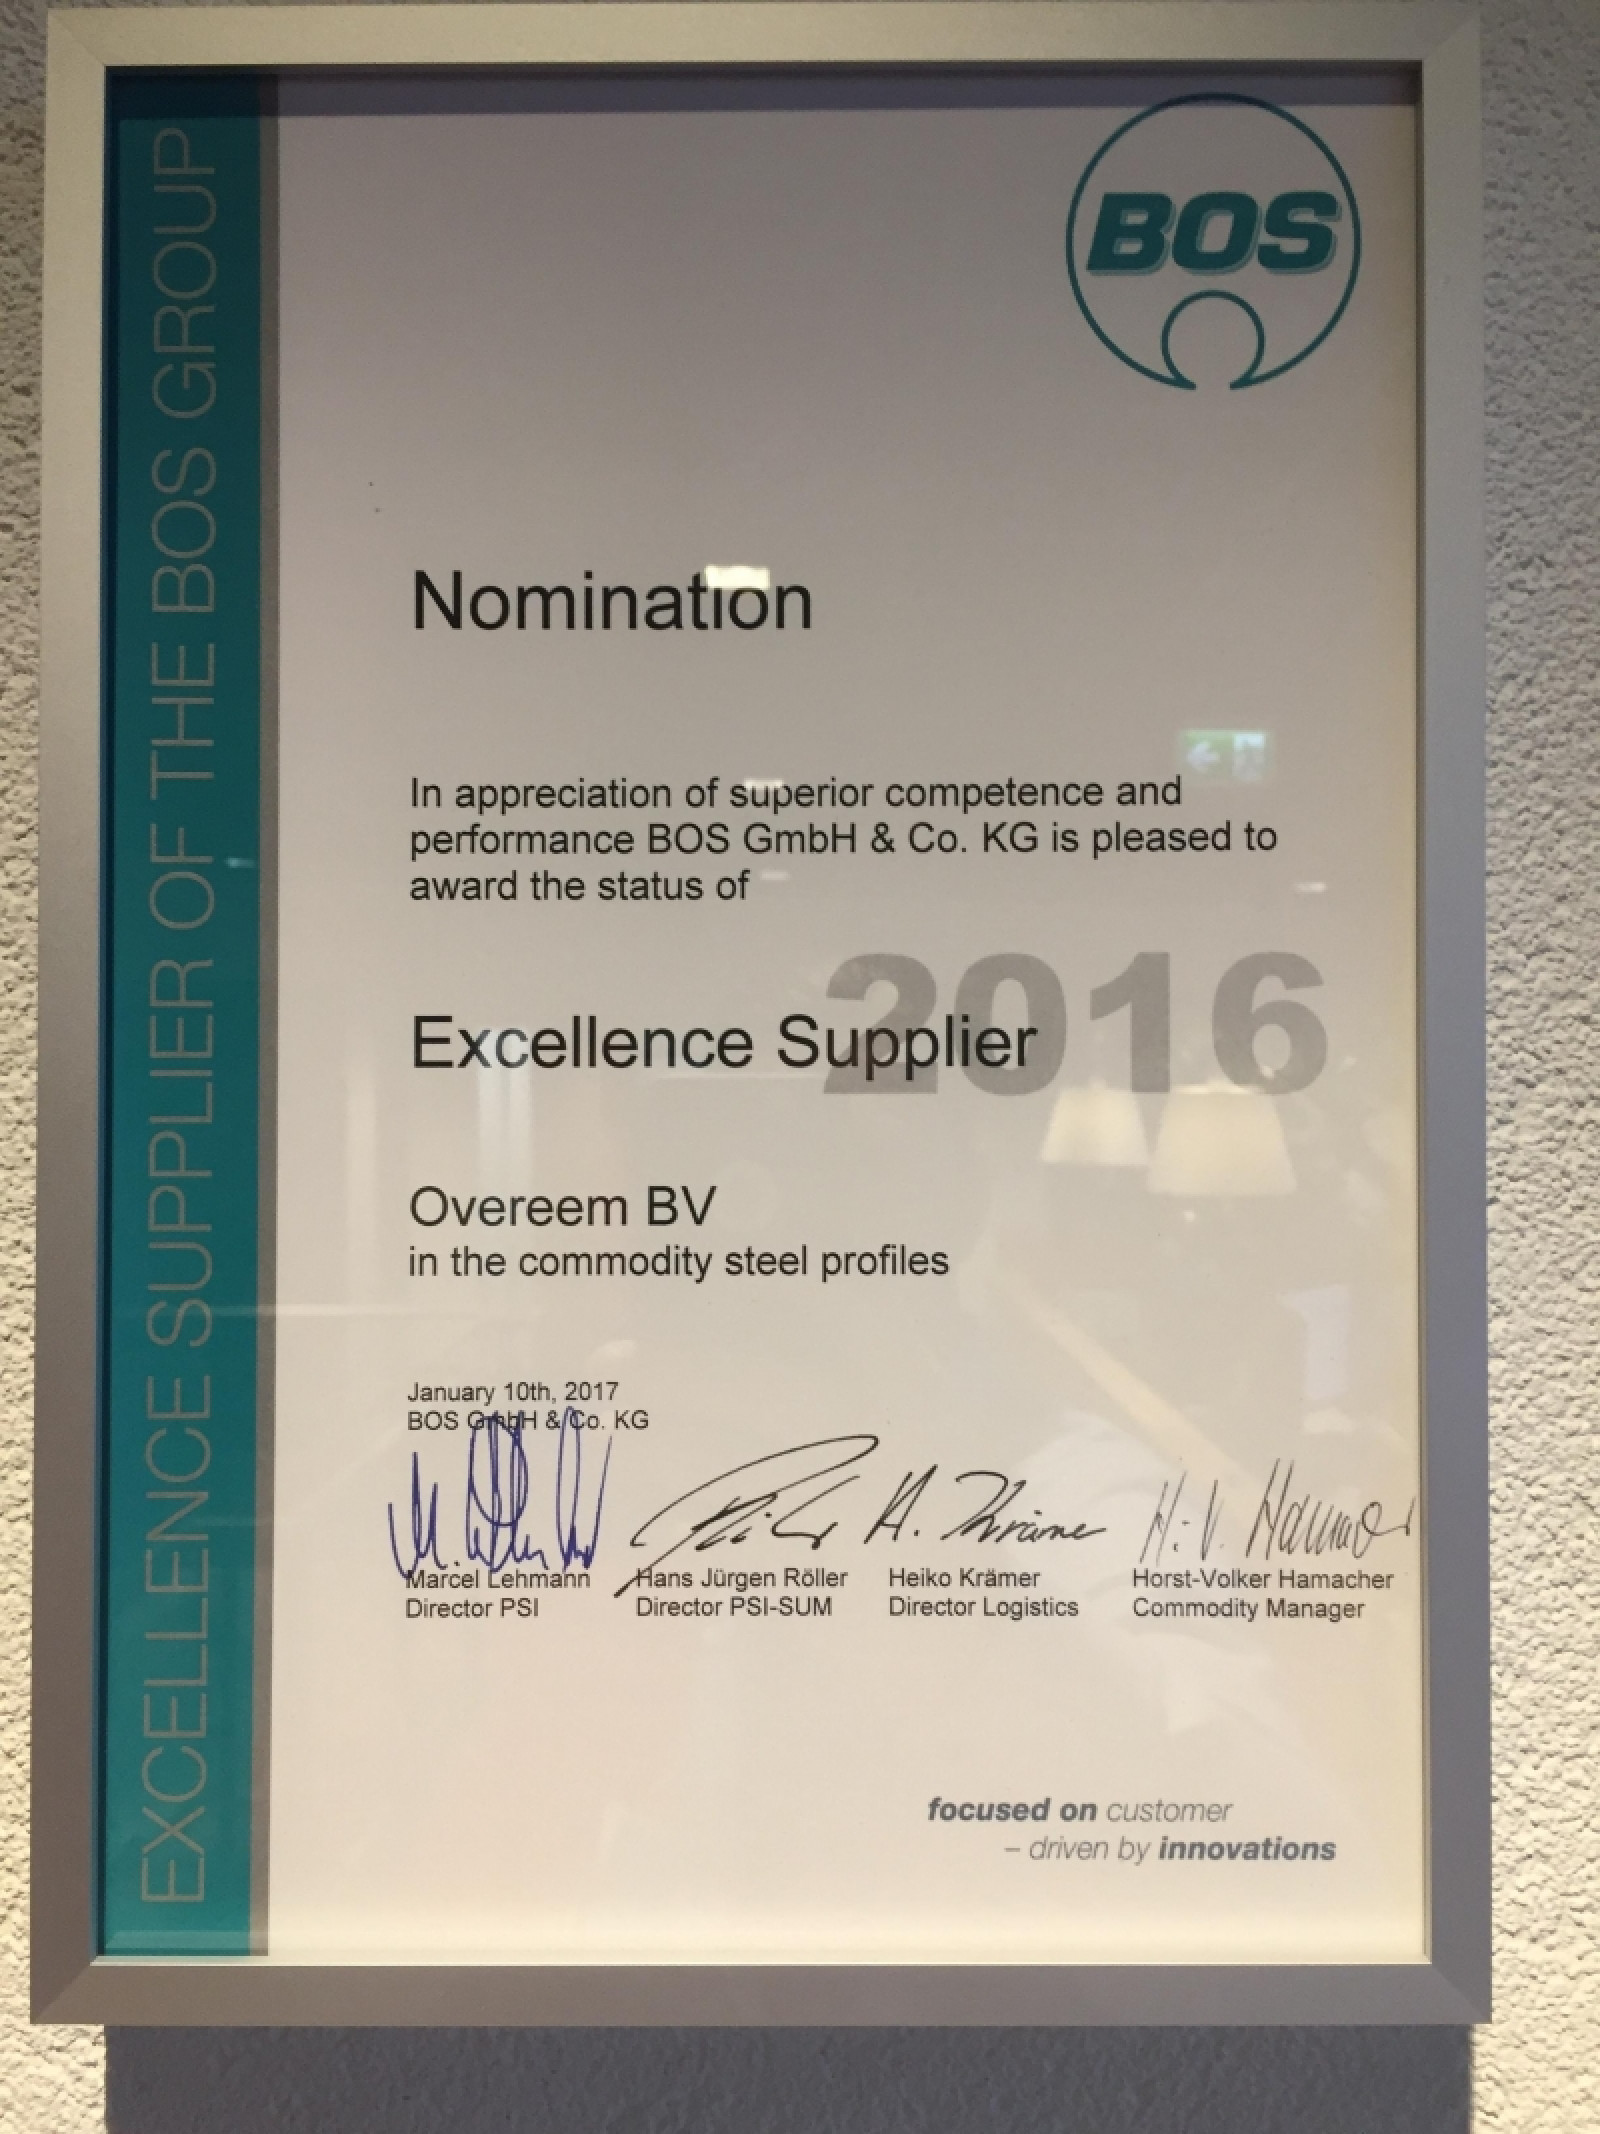 Excellence Supplier of the BOS Group Award